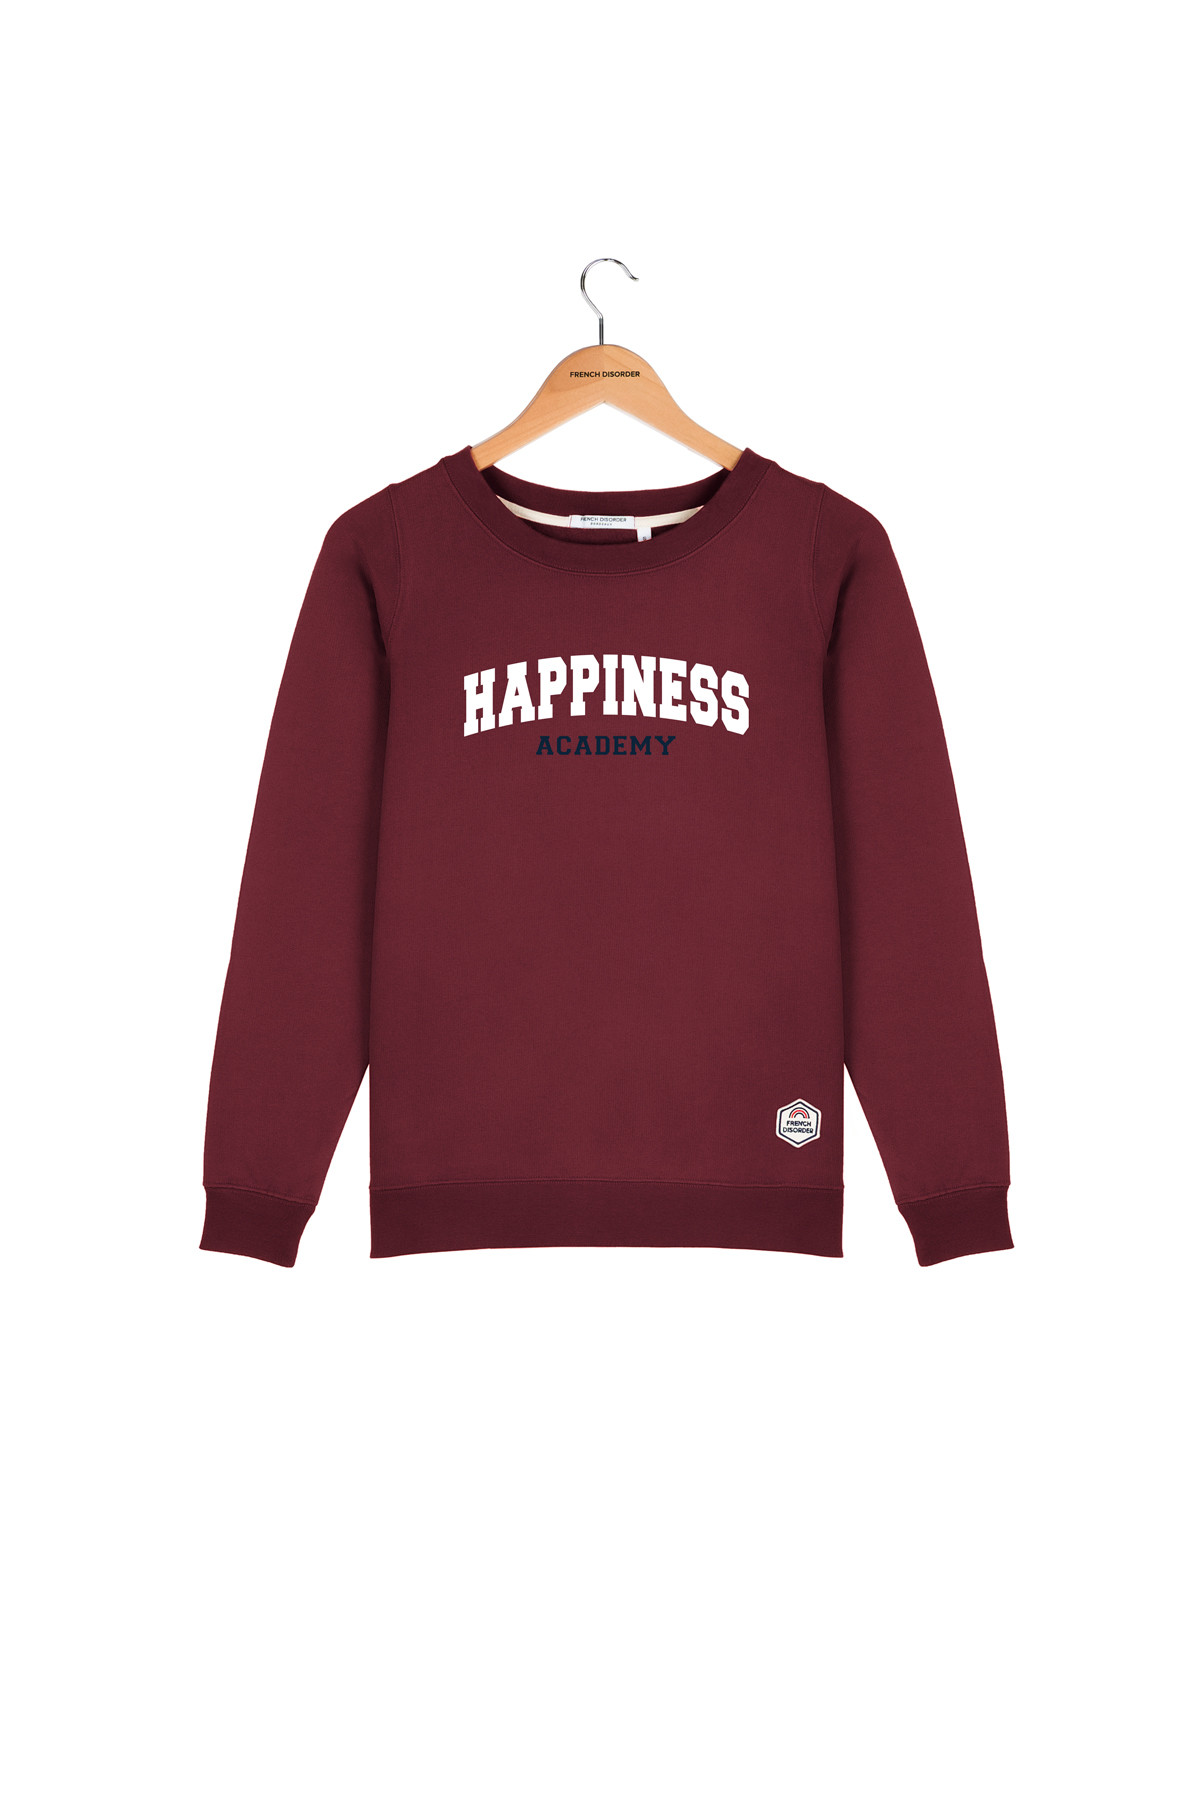 Sweat HAPPINESS ACADEMY French Disorder